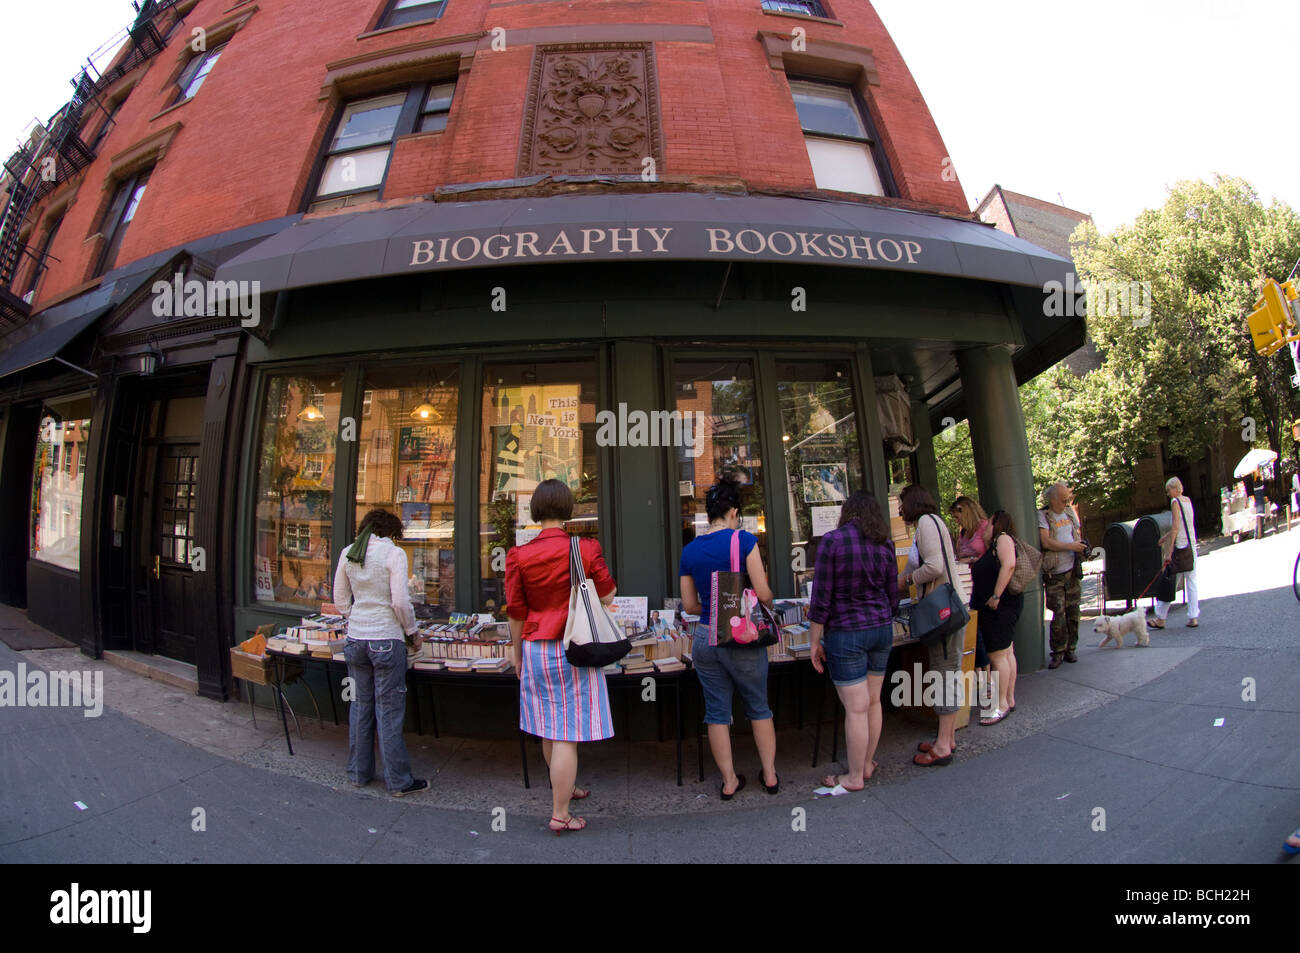 People browse at the book stalls outside the Biography Bookshop in Greenwich Village in New York Stock Photo